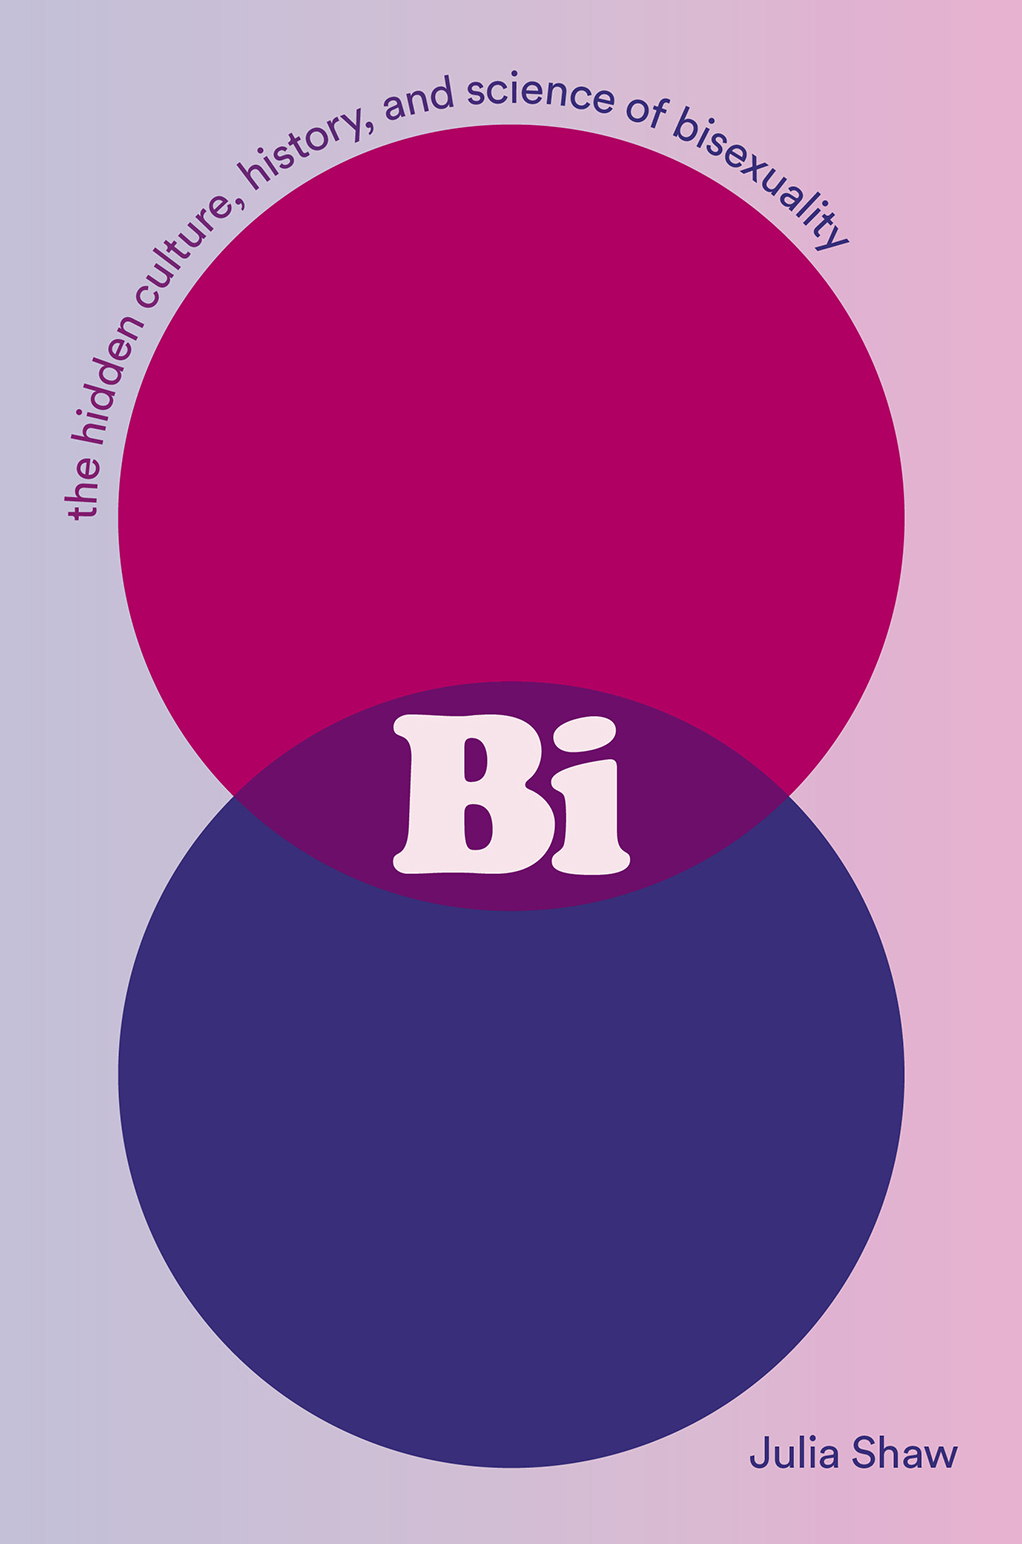 Bi - the hidden culture, history, and science of bisexuality